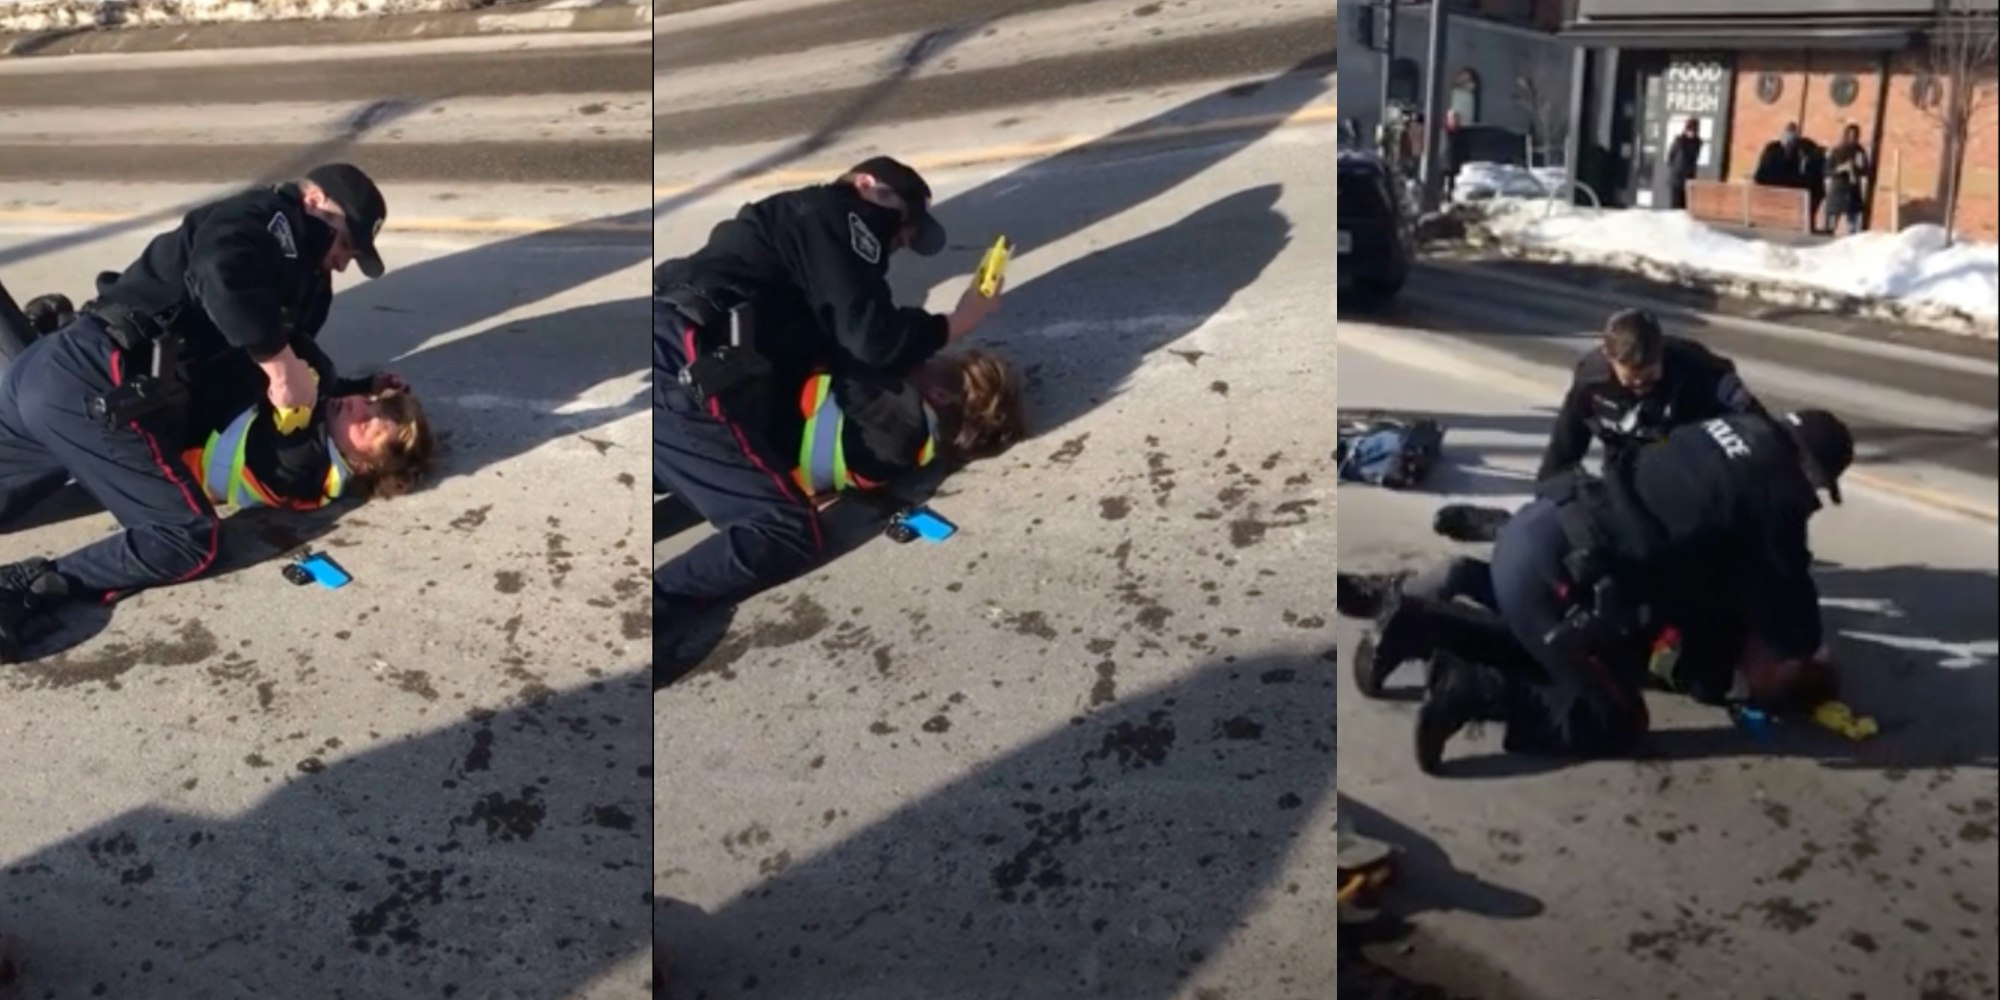 Barrie, Ontario police pin a skateboarder to the ground during arrest